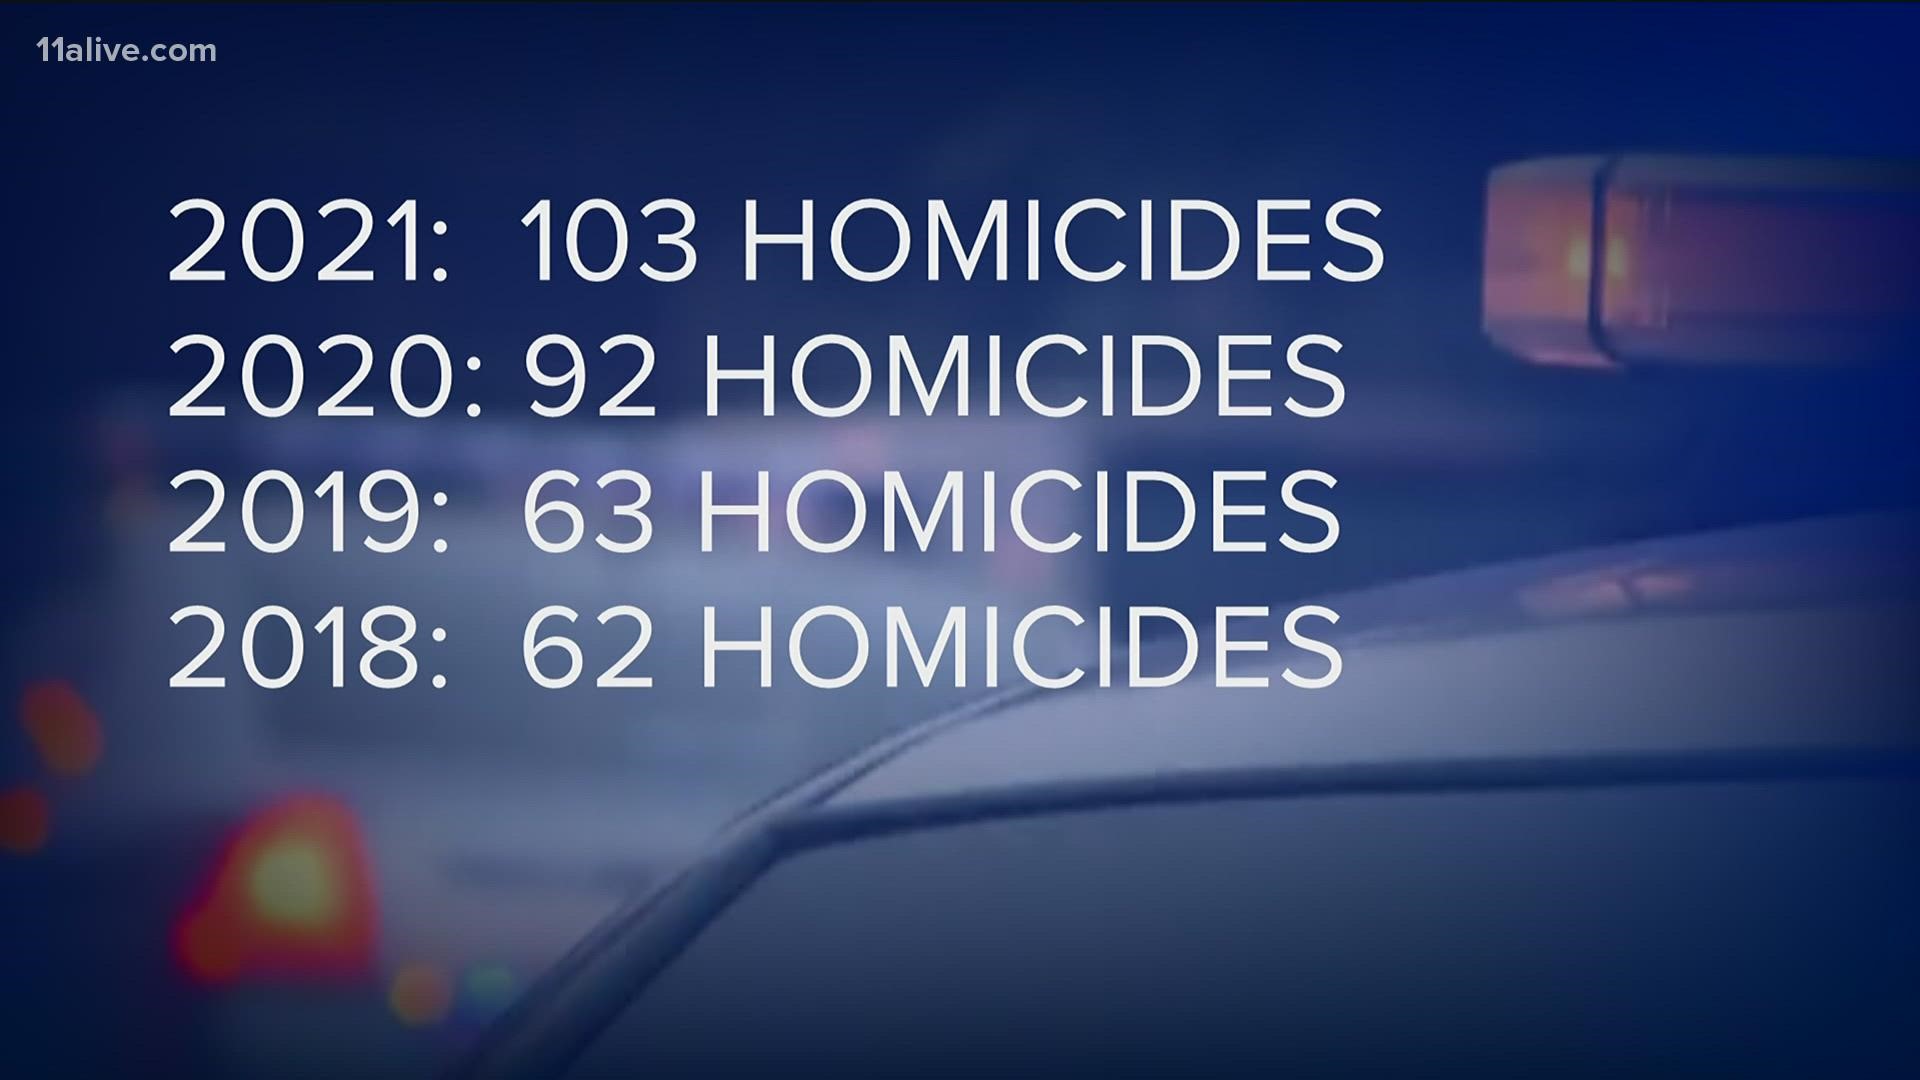 This is the earliest Atlanta has seen 100 homicides in the past few years.